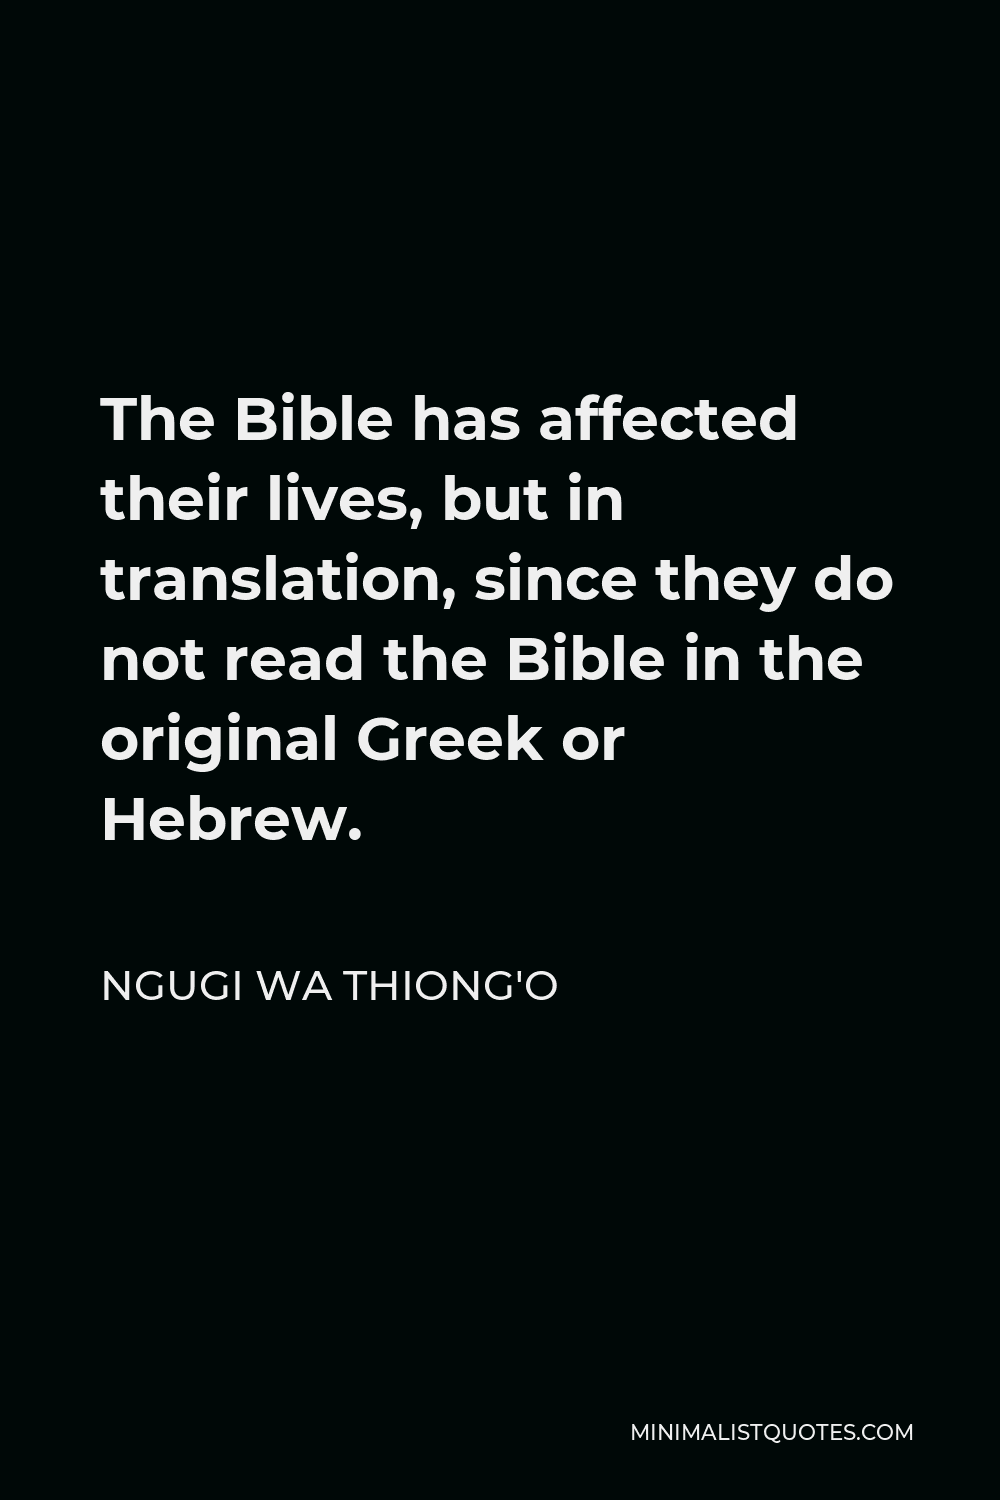 Ngugi wa Thiong'o Quote - The Bible has affected their lives, but in translation, since they do not read the Bible in the original Greek or Hebrew.